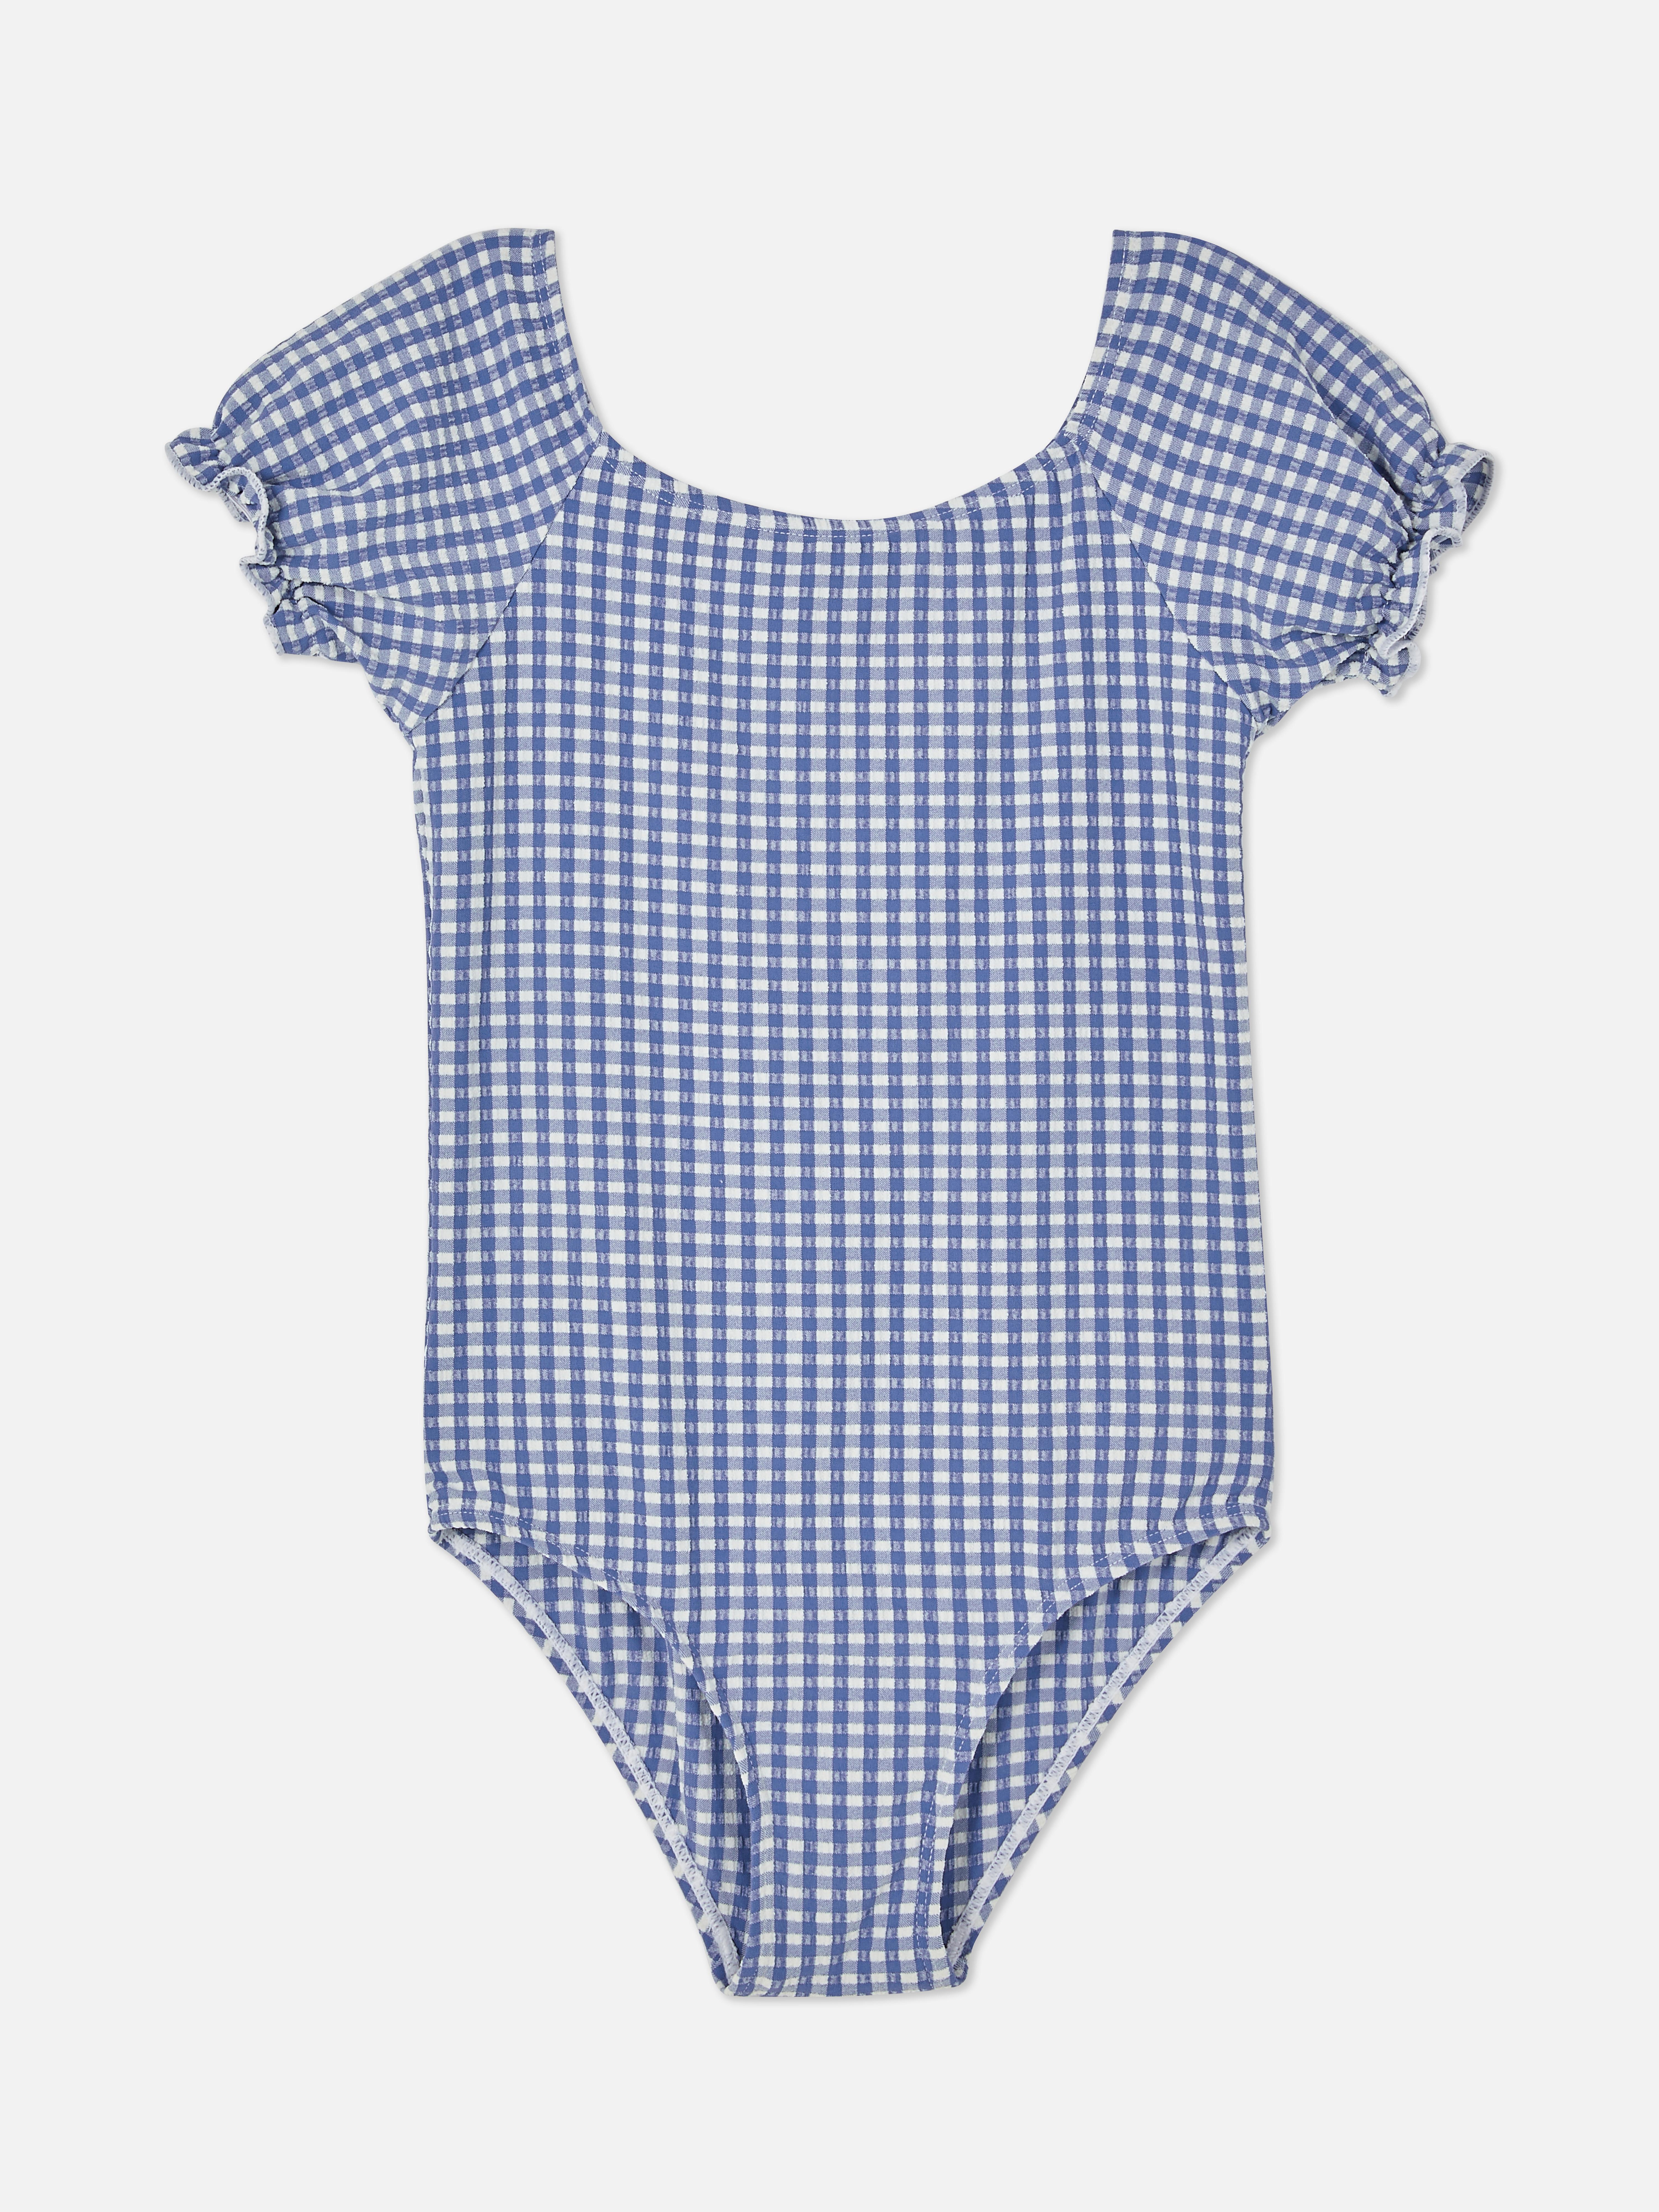 Gingham Check Swimsuit